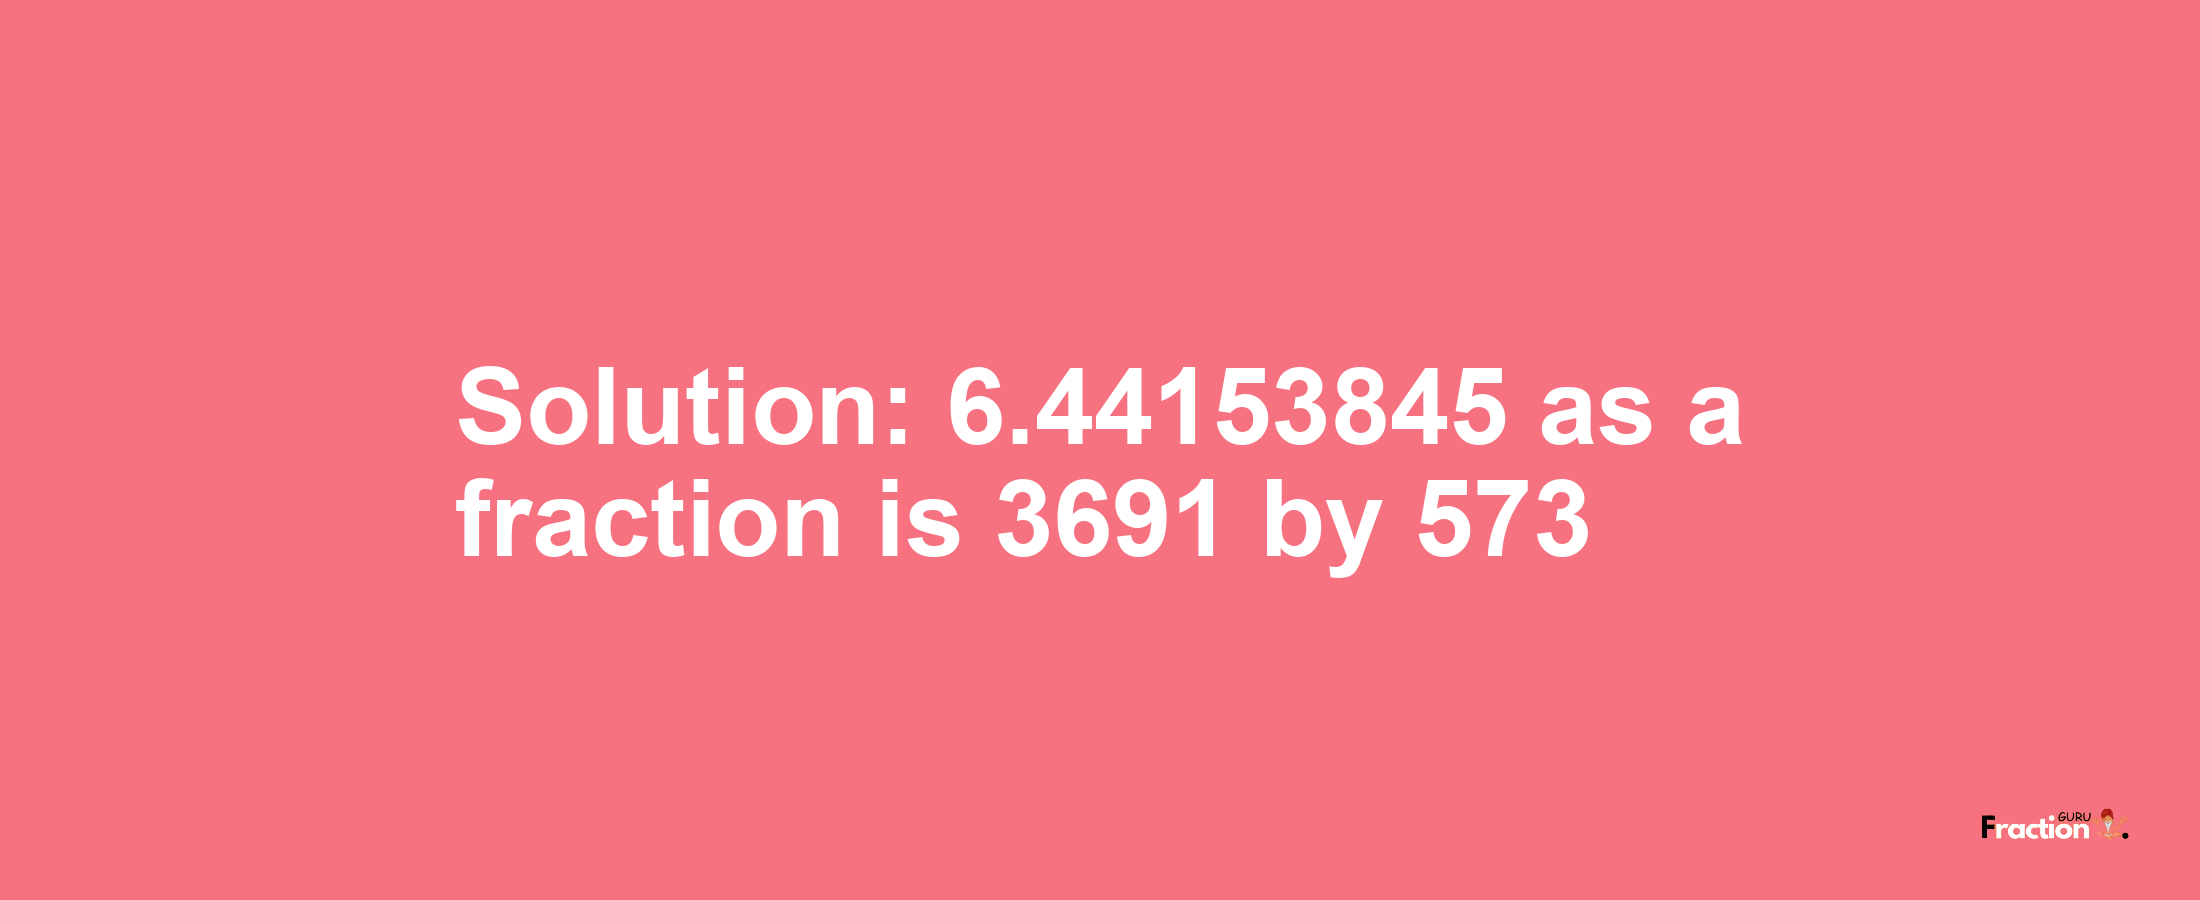 Solution:6.44153845 as a fraction is 3691/573